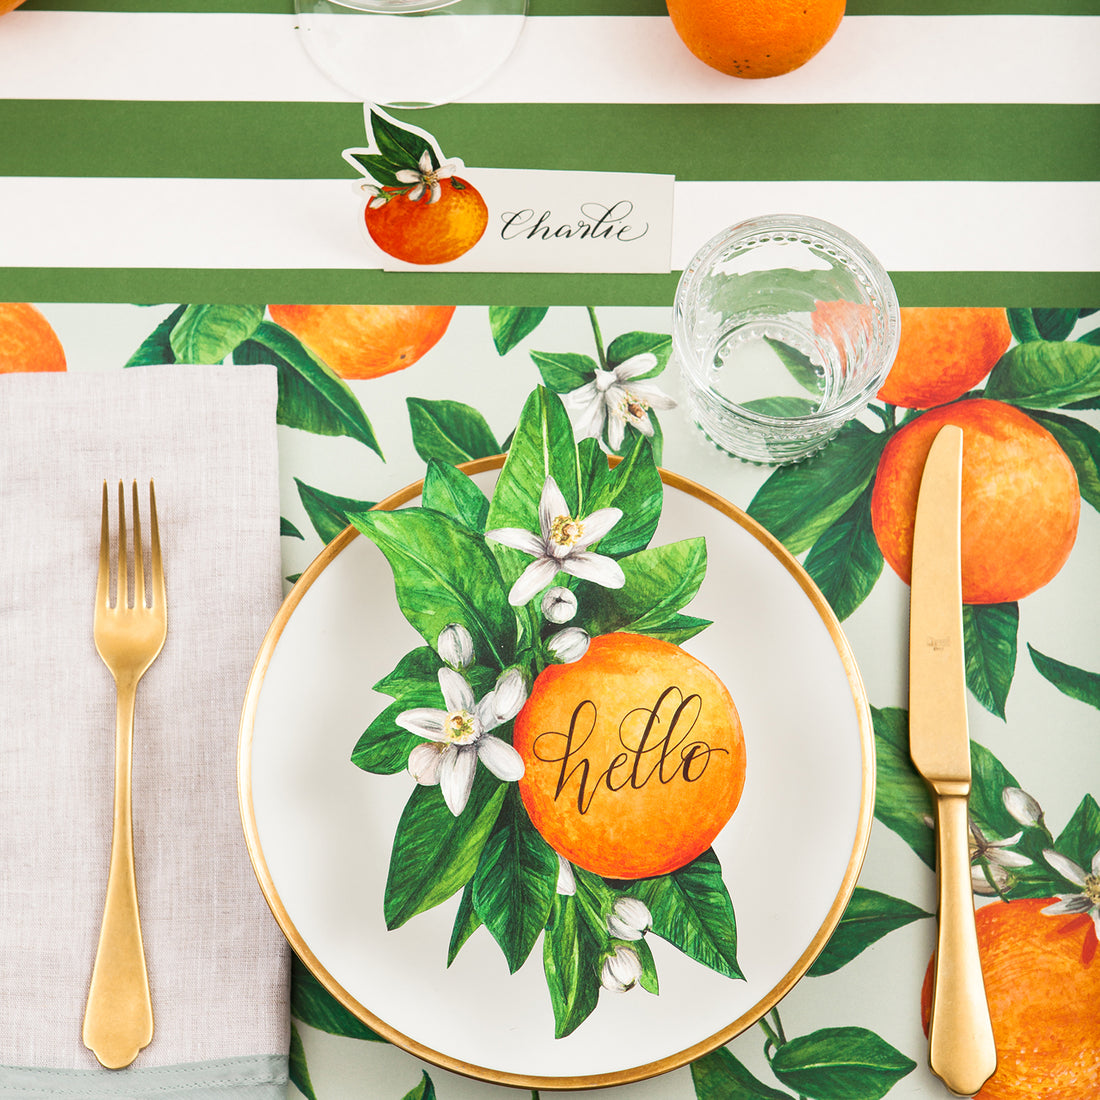 A vibrant citrus-themed place setting featuring an Orange Blossom Table Accent with &quot;hello&quot; written on the orange in beautiful script resting on the plate.